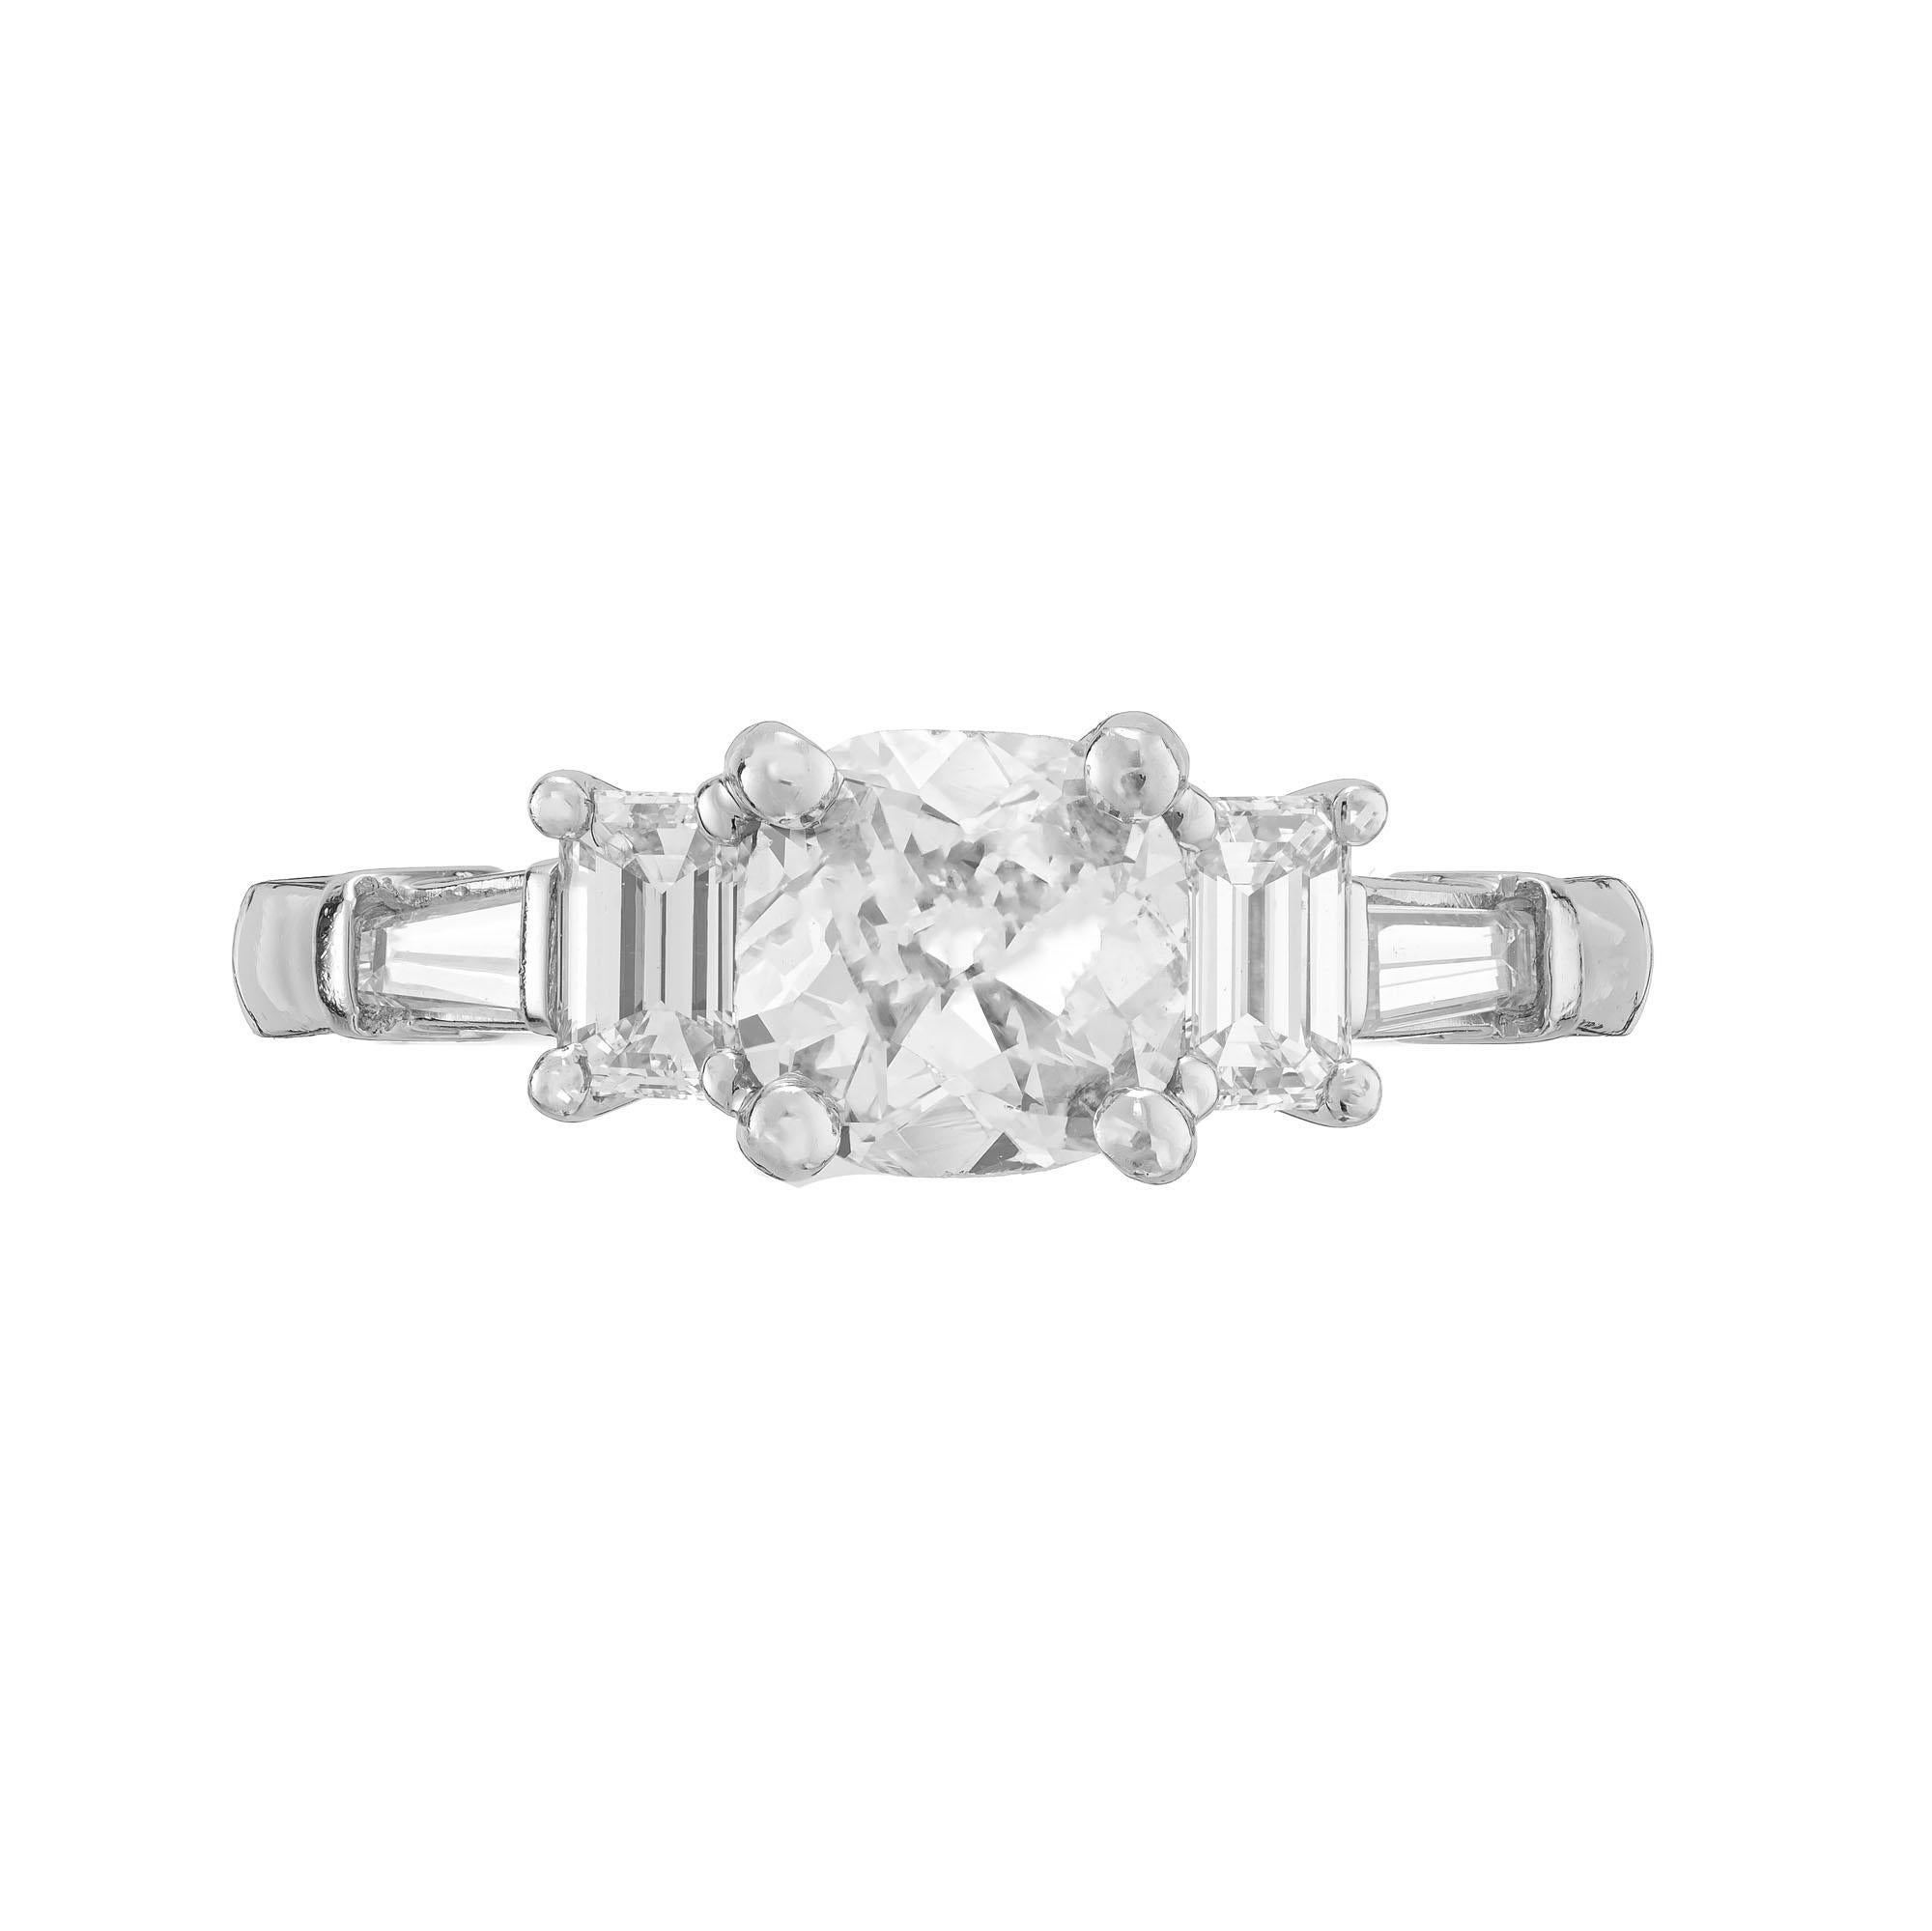 Diamond engagement ring. EGL certified cushion cut center diamond with 2 emerald cut and 2 tapered baguette side diamonds, set in platinum. The stones are circa 1900.  Raised crown and a small table. The setting was created in true Art Deco style